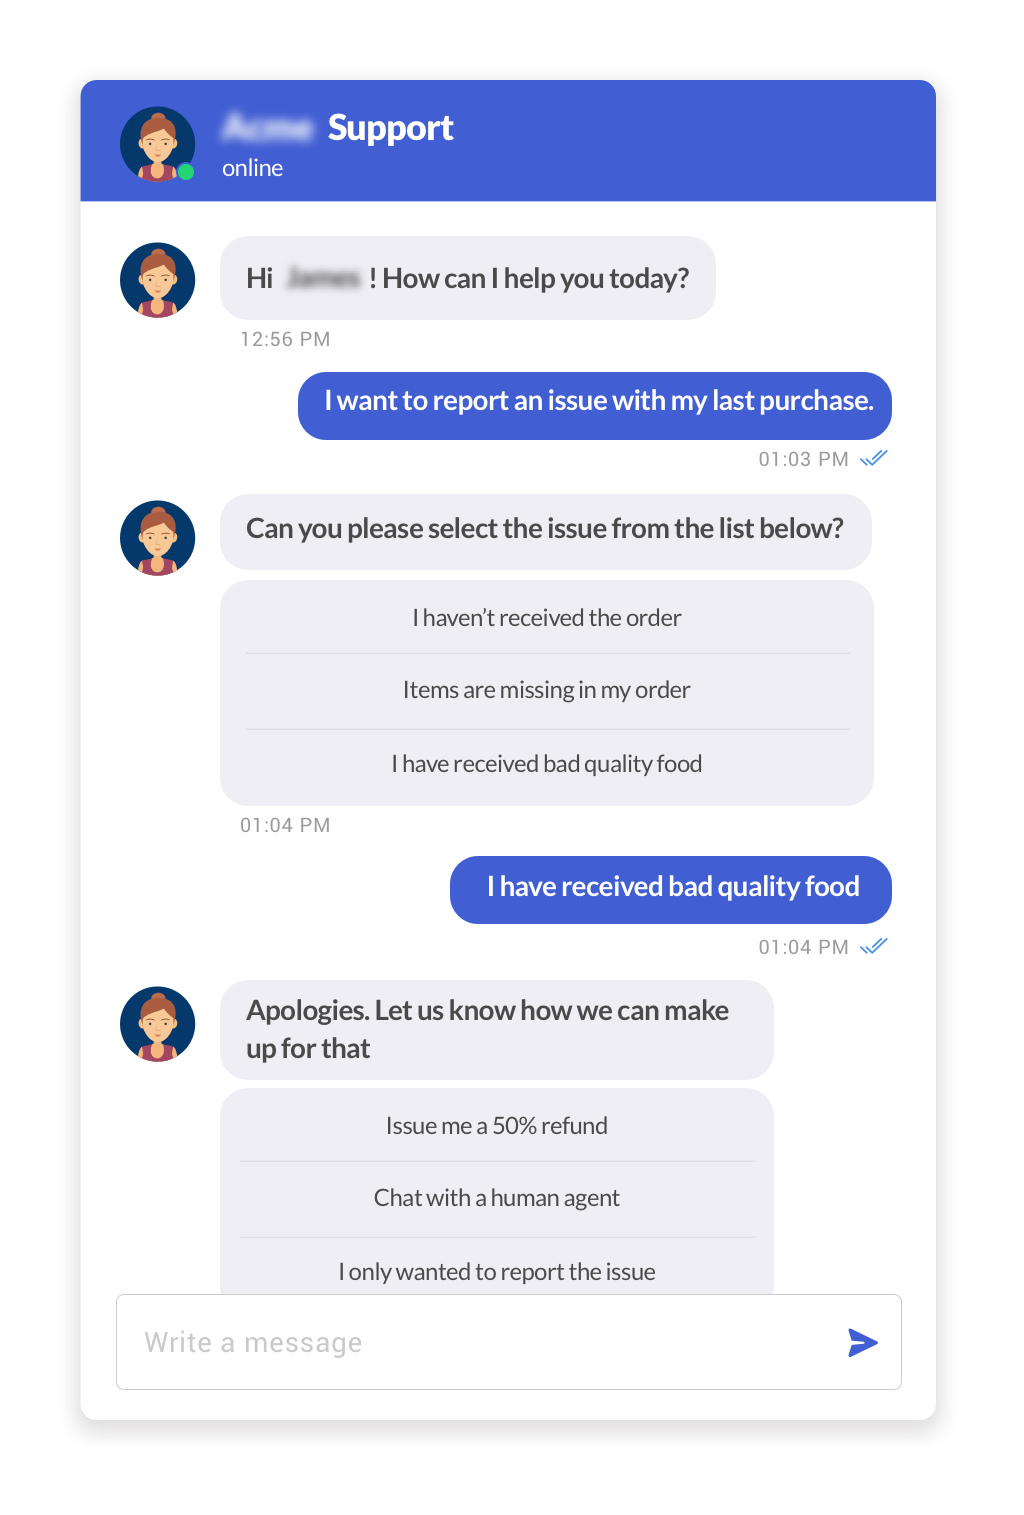 Maximizing Customer Engagement with Typebot's Personalized Chatbot  Conversations